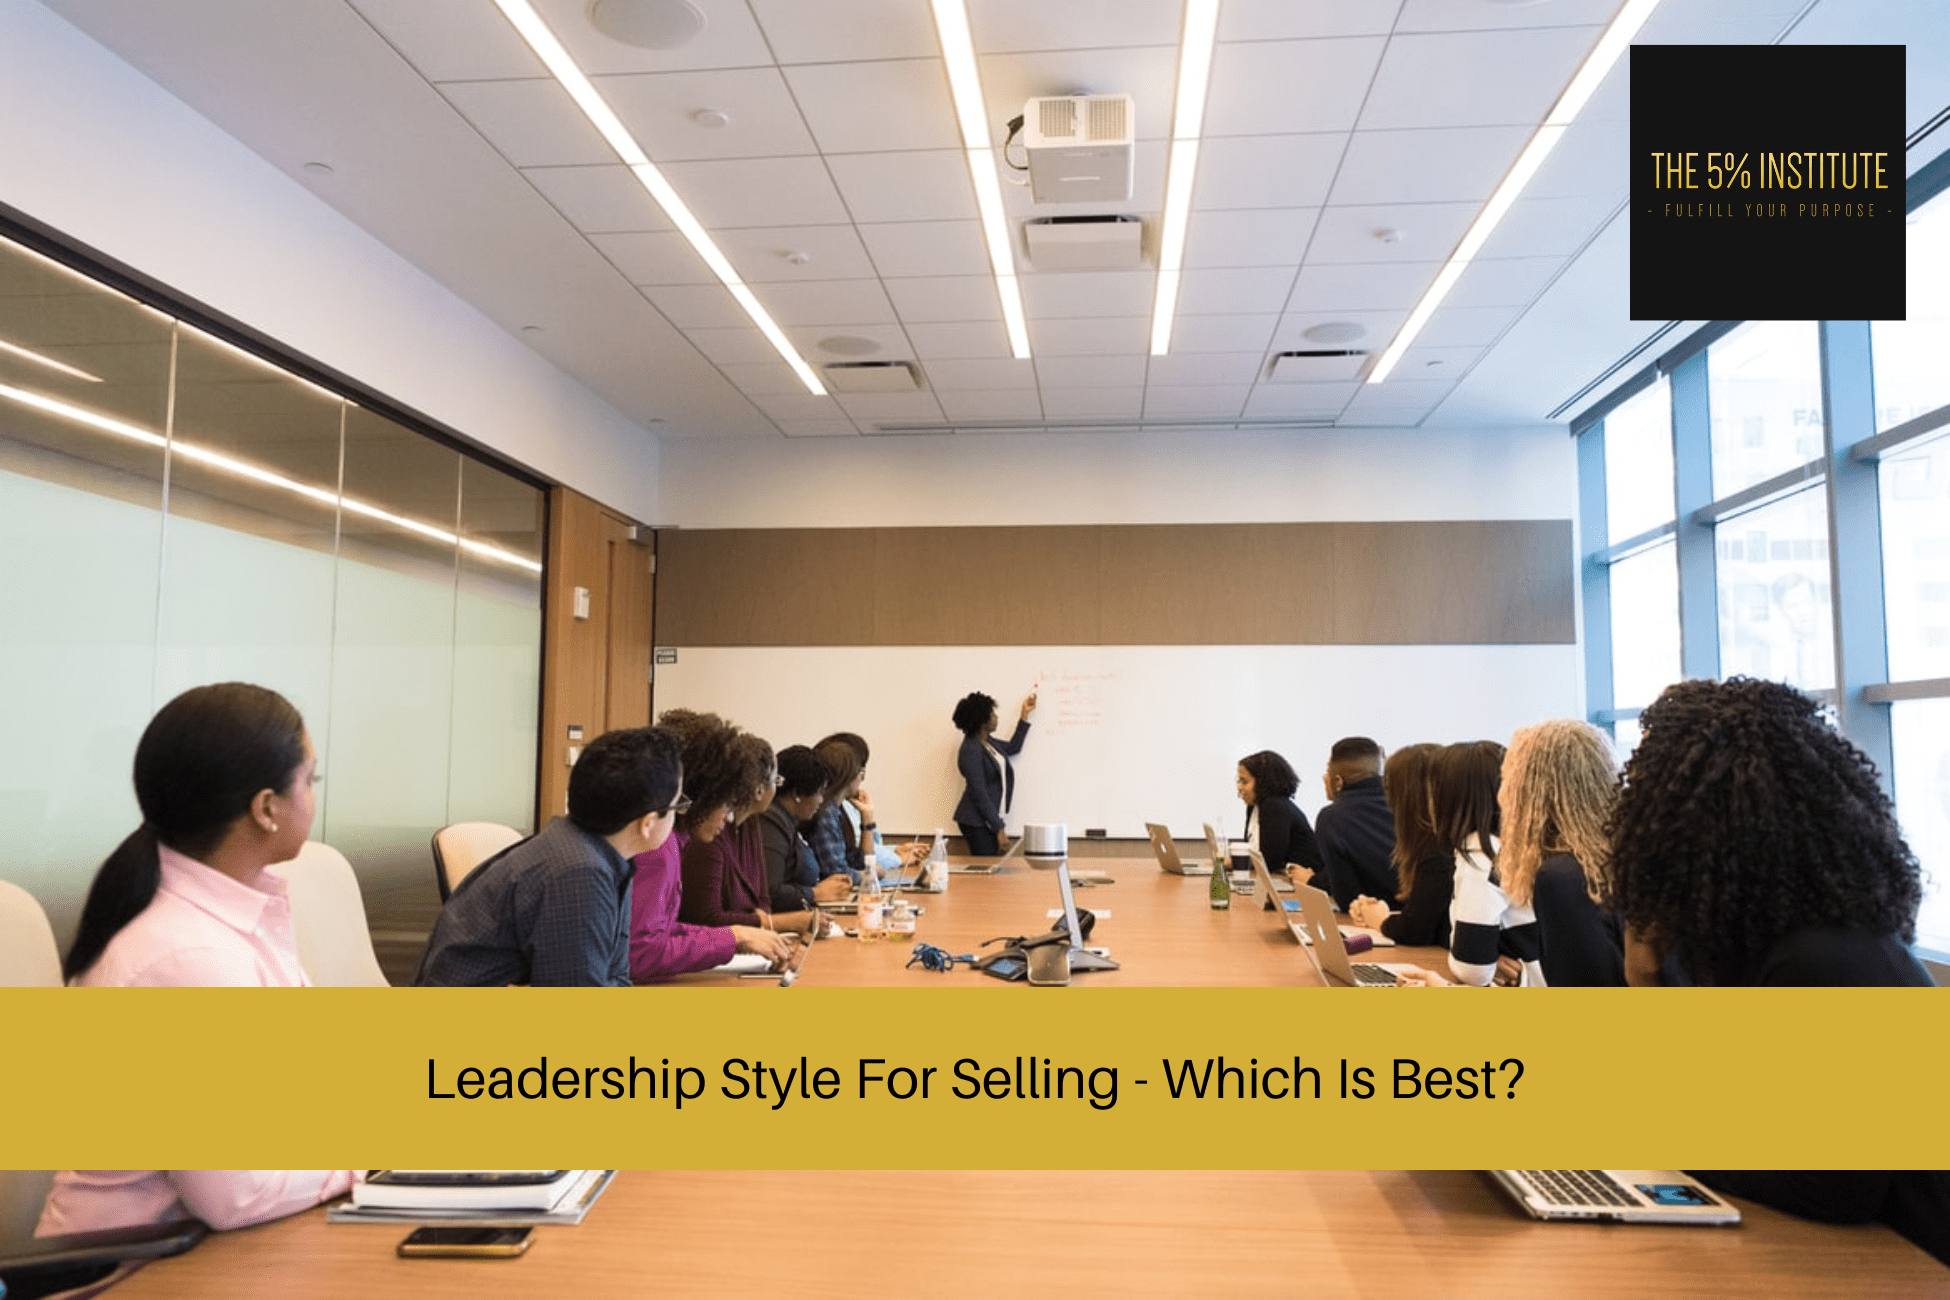 Leadership Style For Selling - Which Is Best